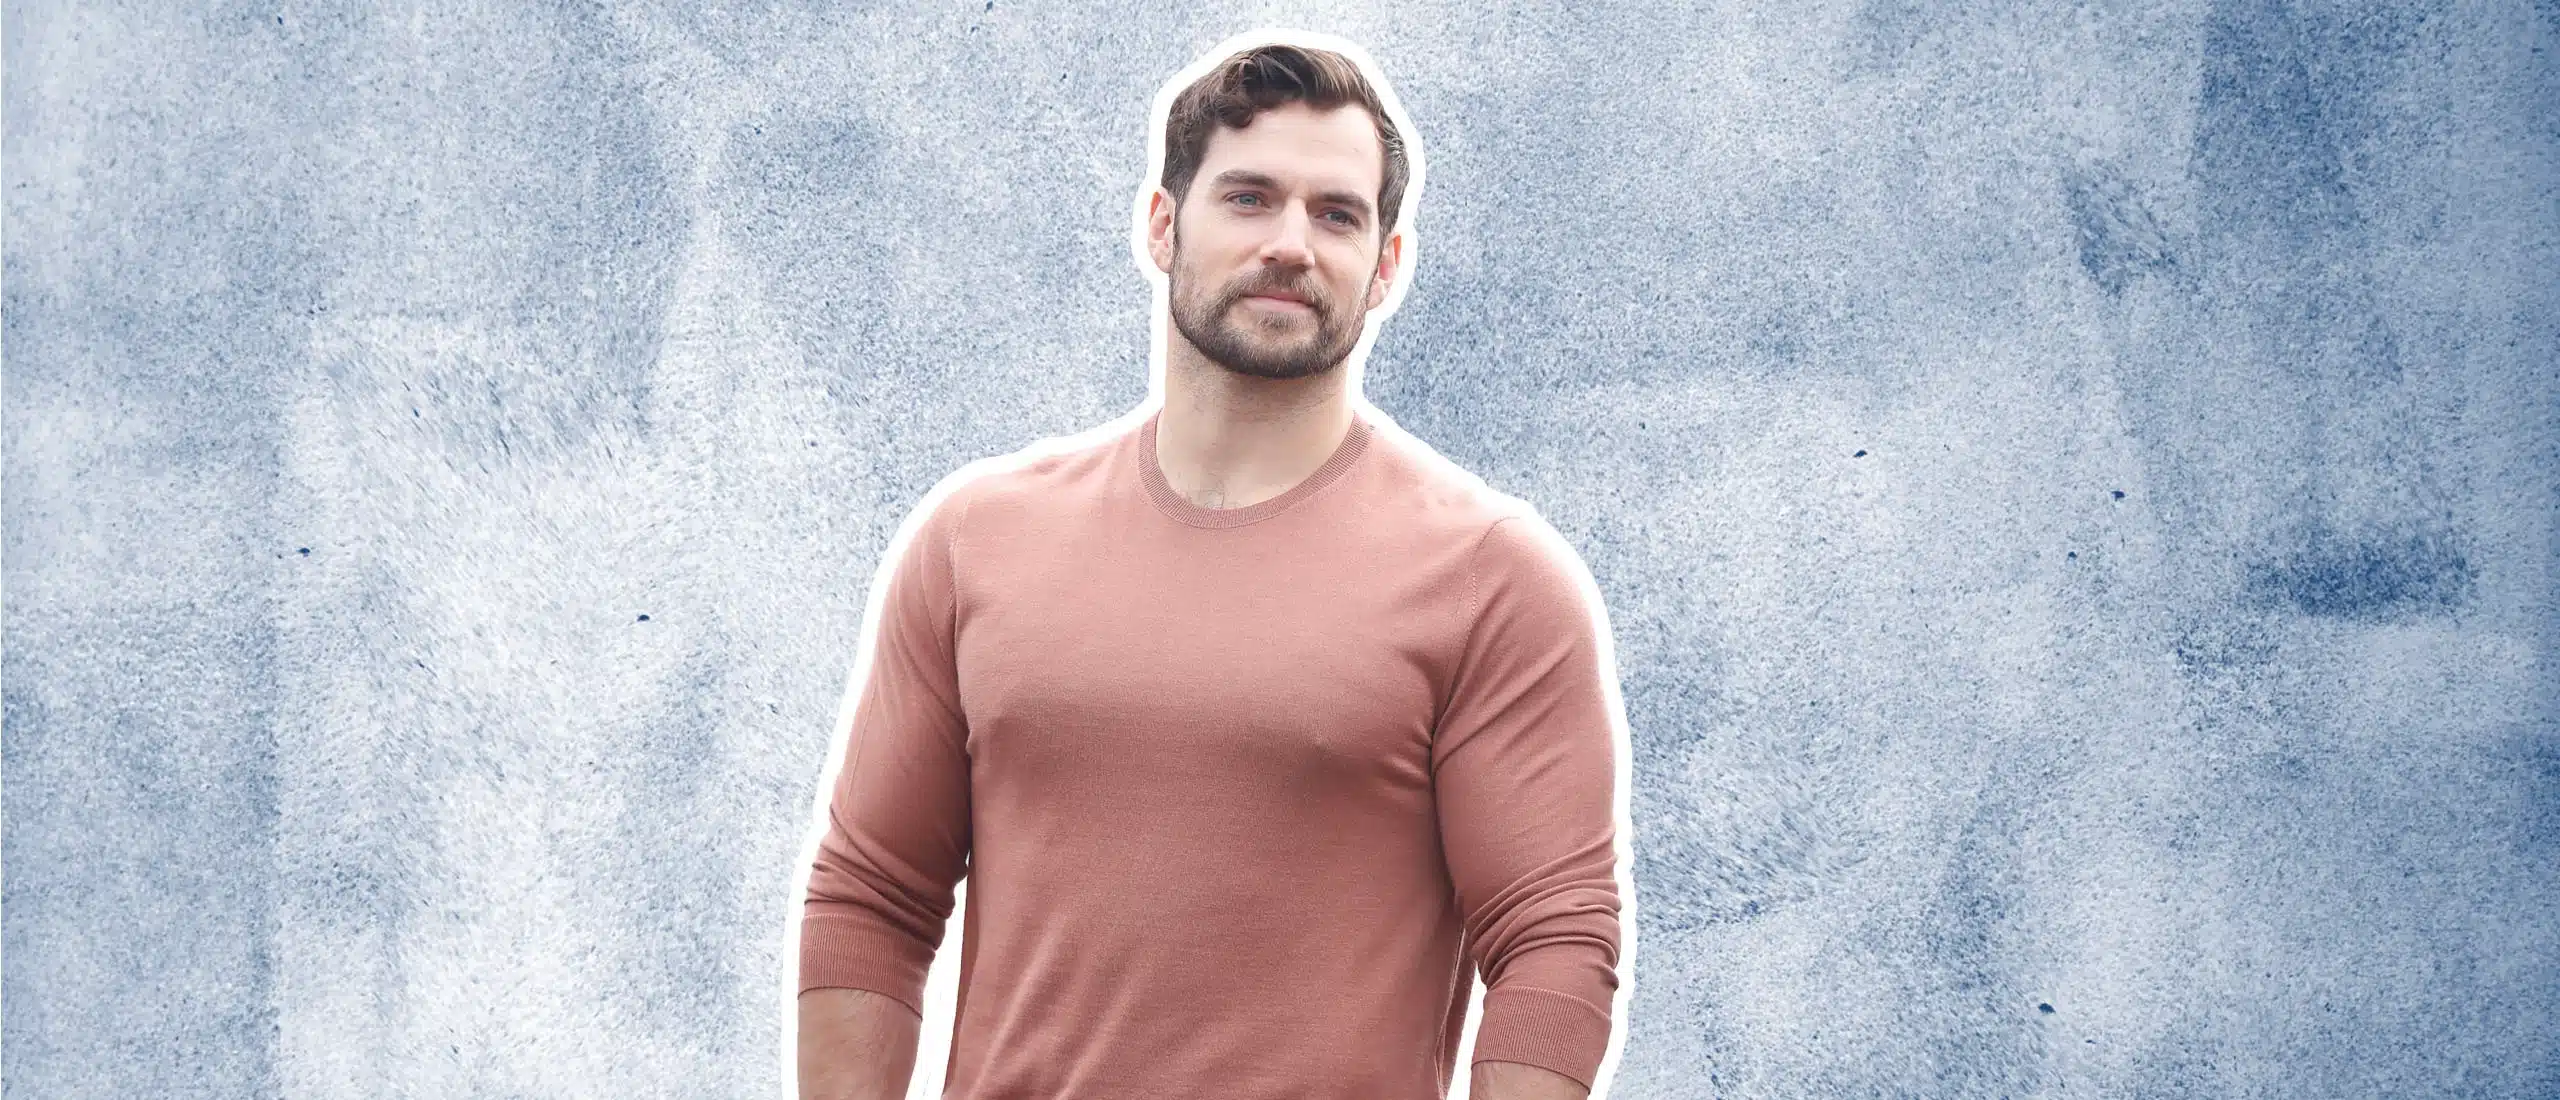 Henry Cavill with a sly smile on a grey background